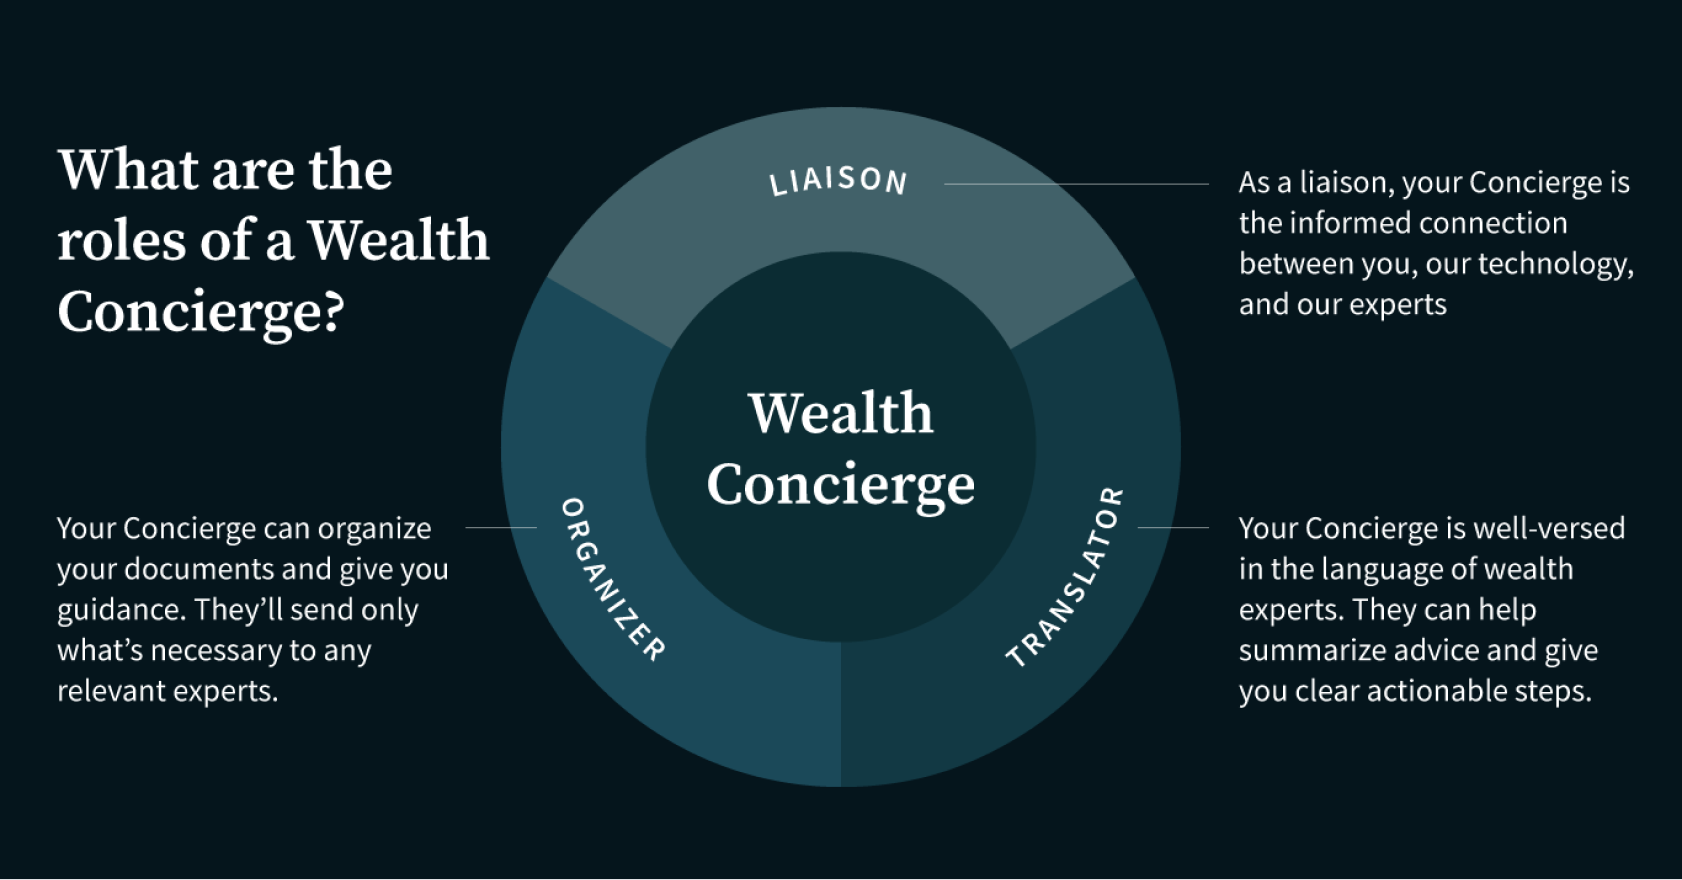 What is a Wealth Concierge